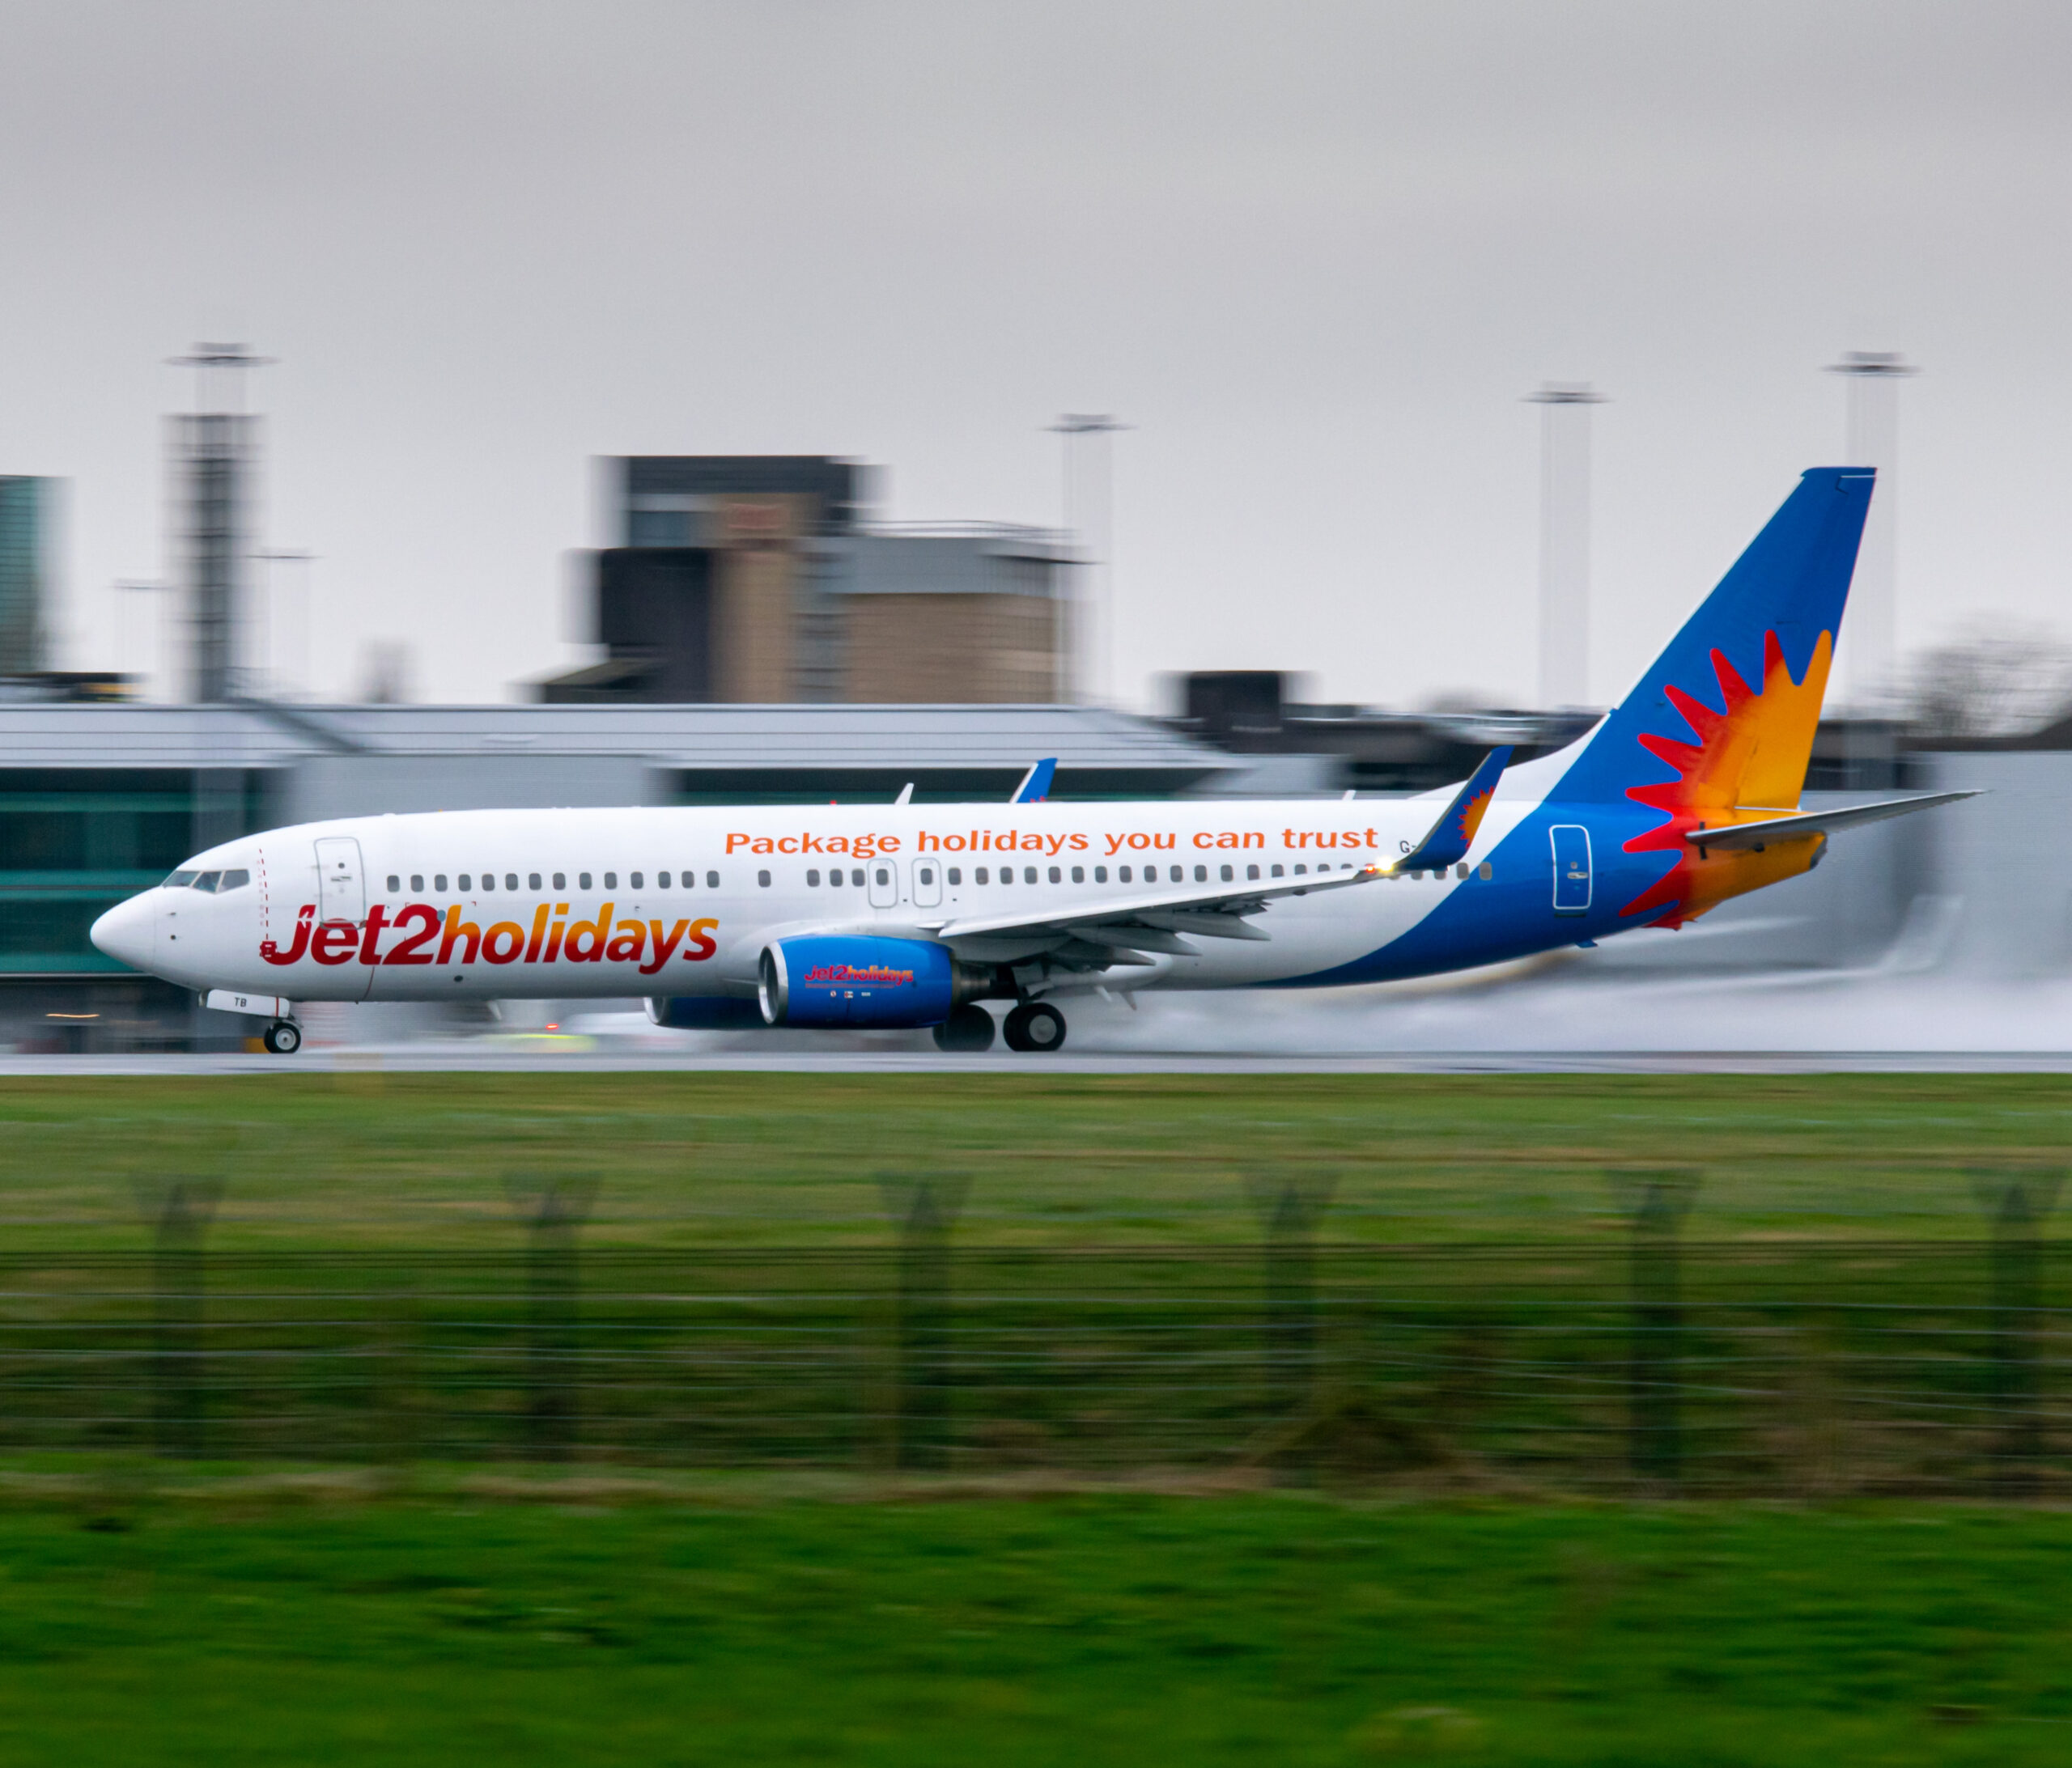 Jet2holidays, part of the Jet2 group, is now the largest holiday company in the UK.